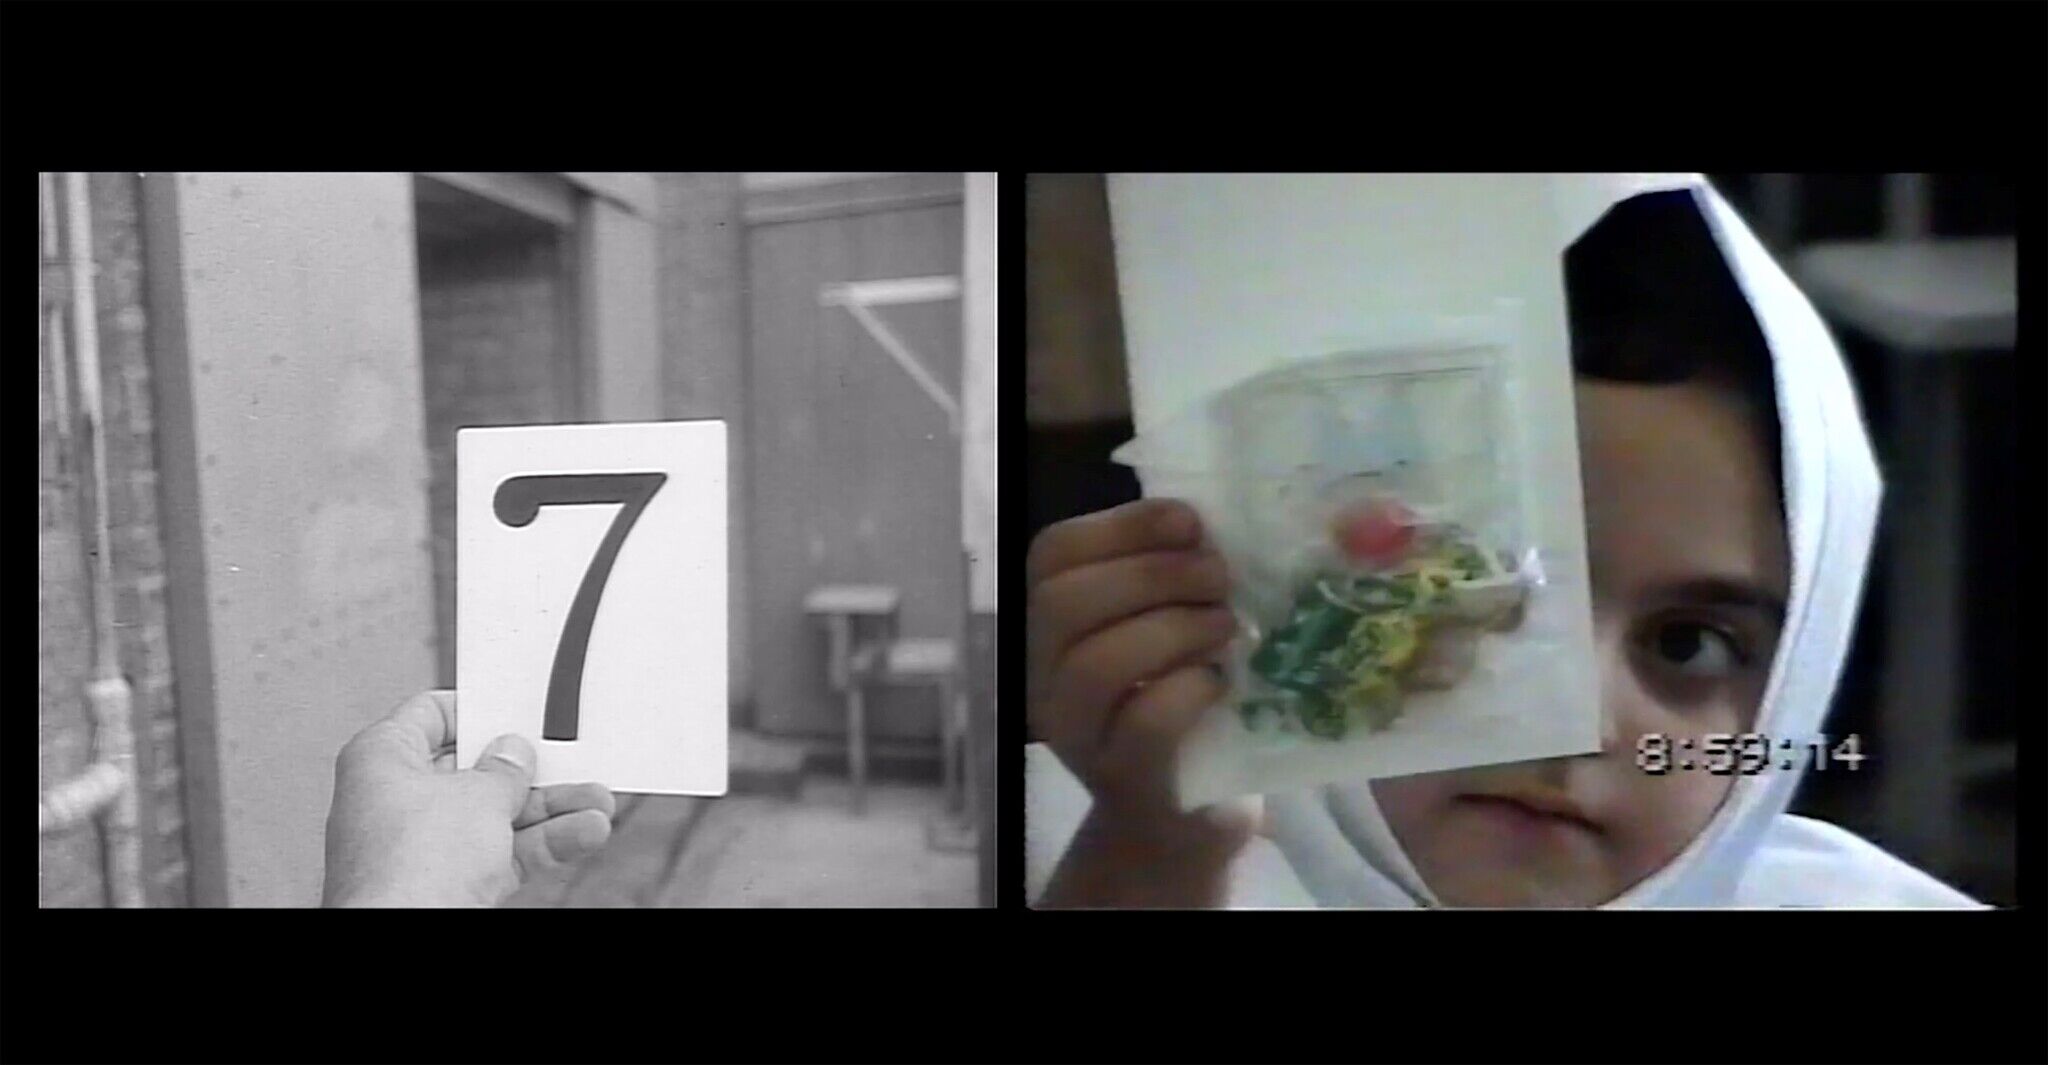 Split screen with a hand holding a number 7 card on the left and a child peeking from behind a clear bag on the right.